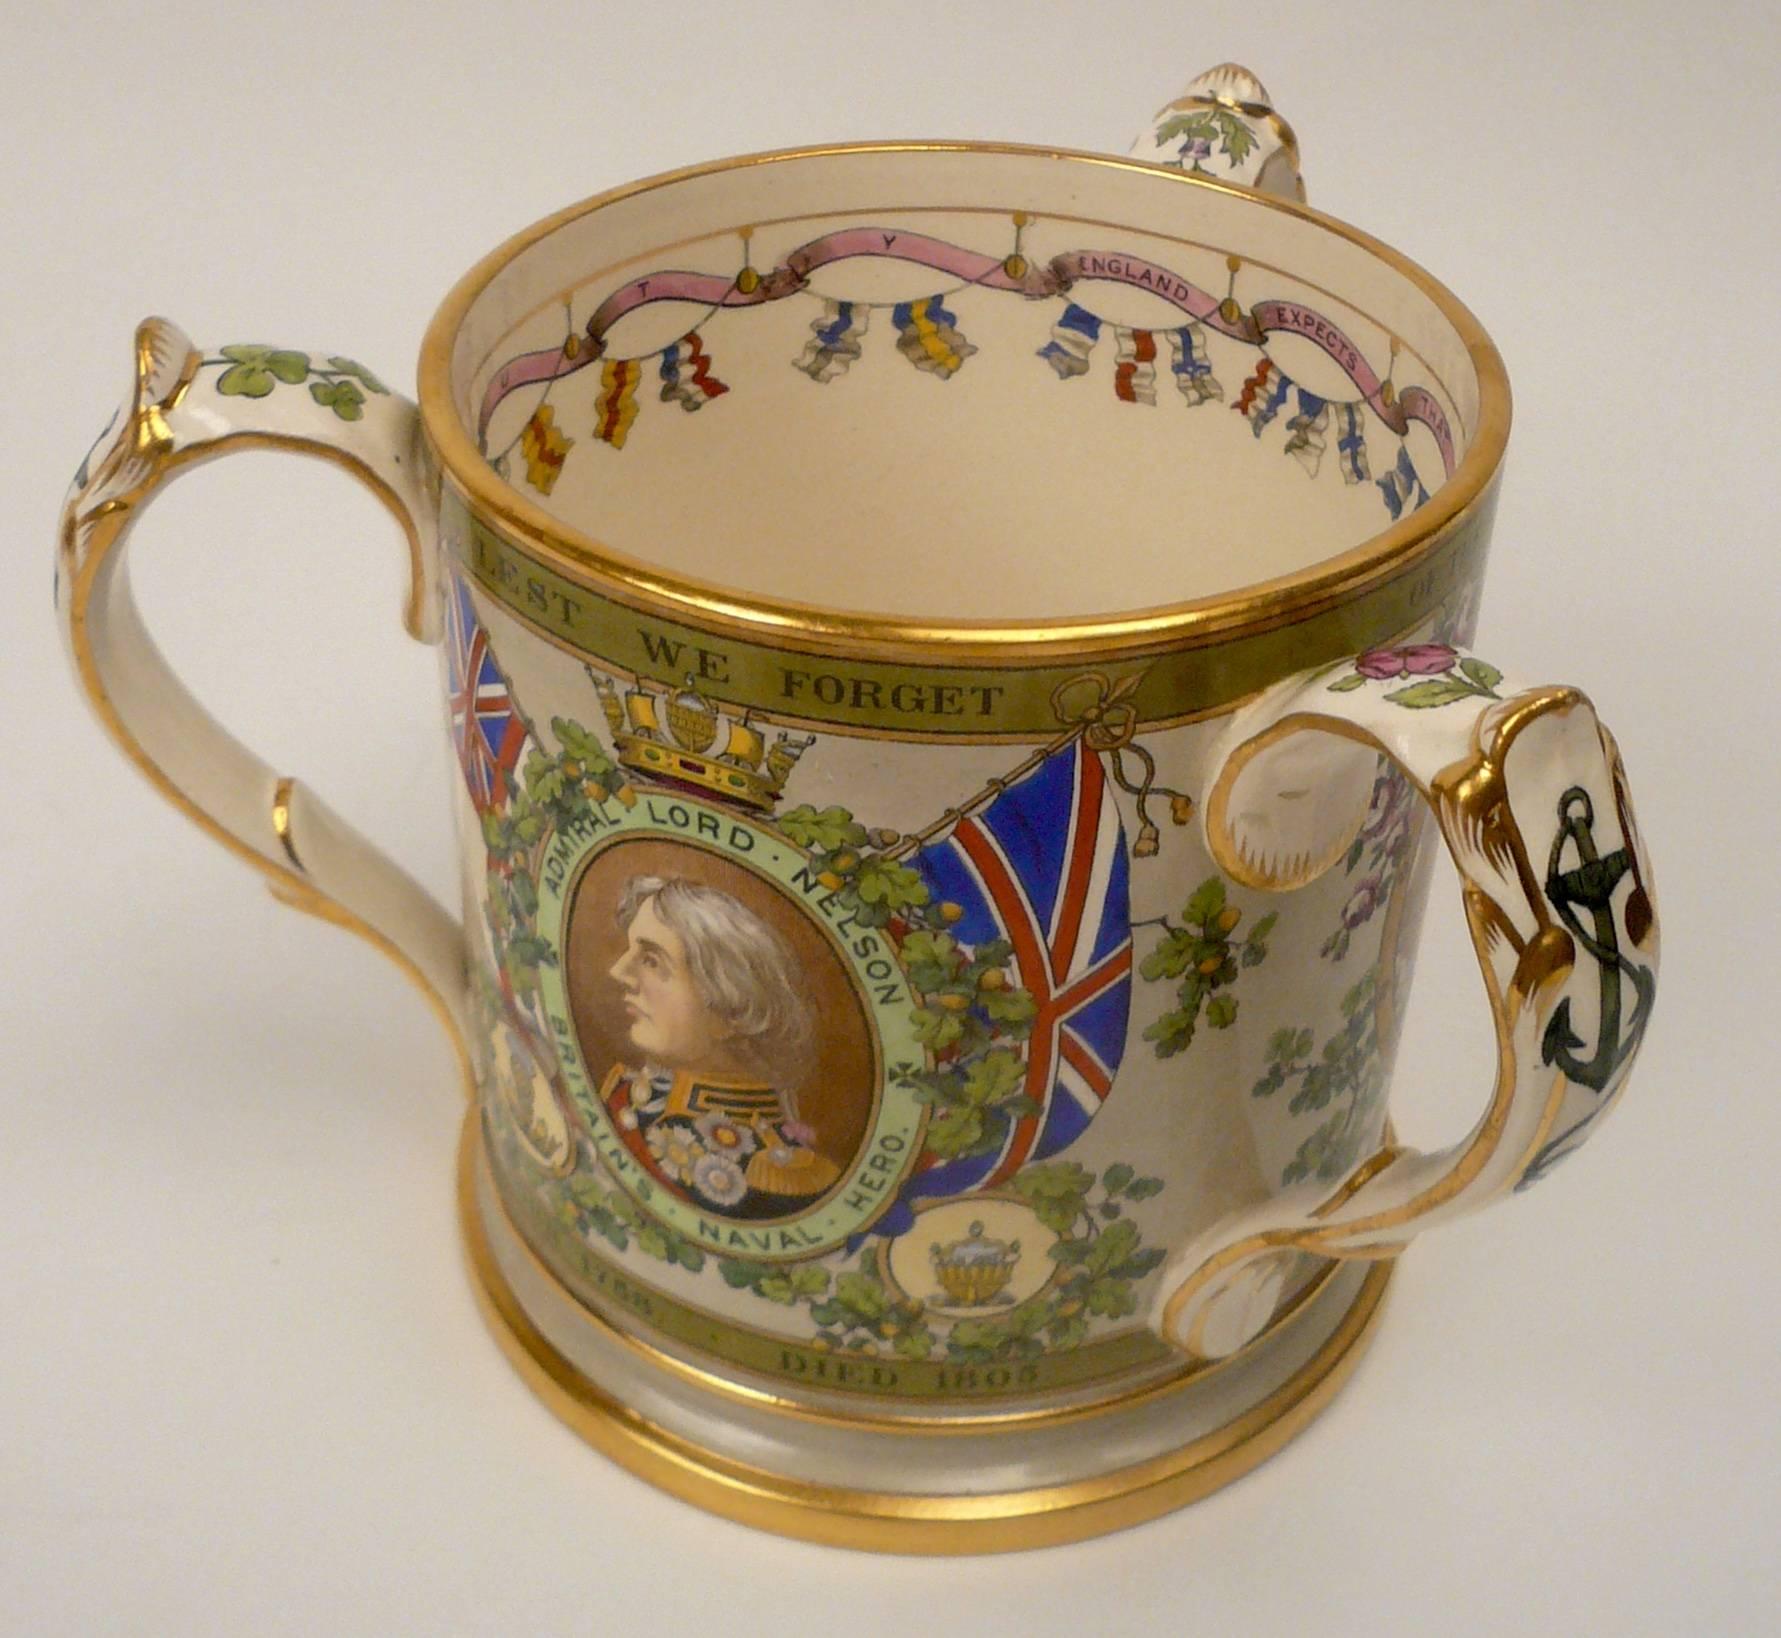 An 'Edition De Luxe' Trafalgar centenary porcelain Tyg, 1905, subscribers copy #5. This rare English commemorative loving cup was retailed by T. Goode & Co.